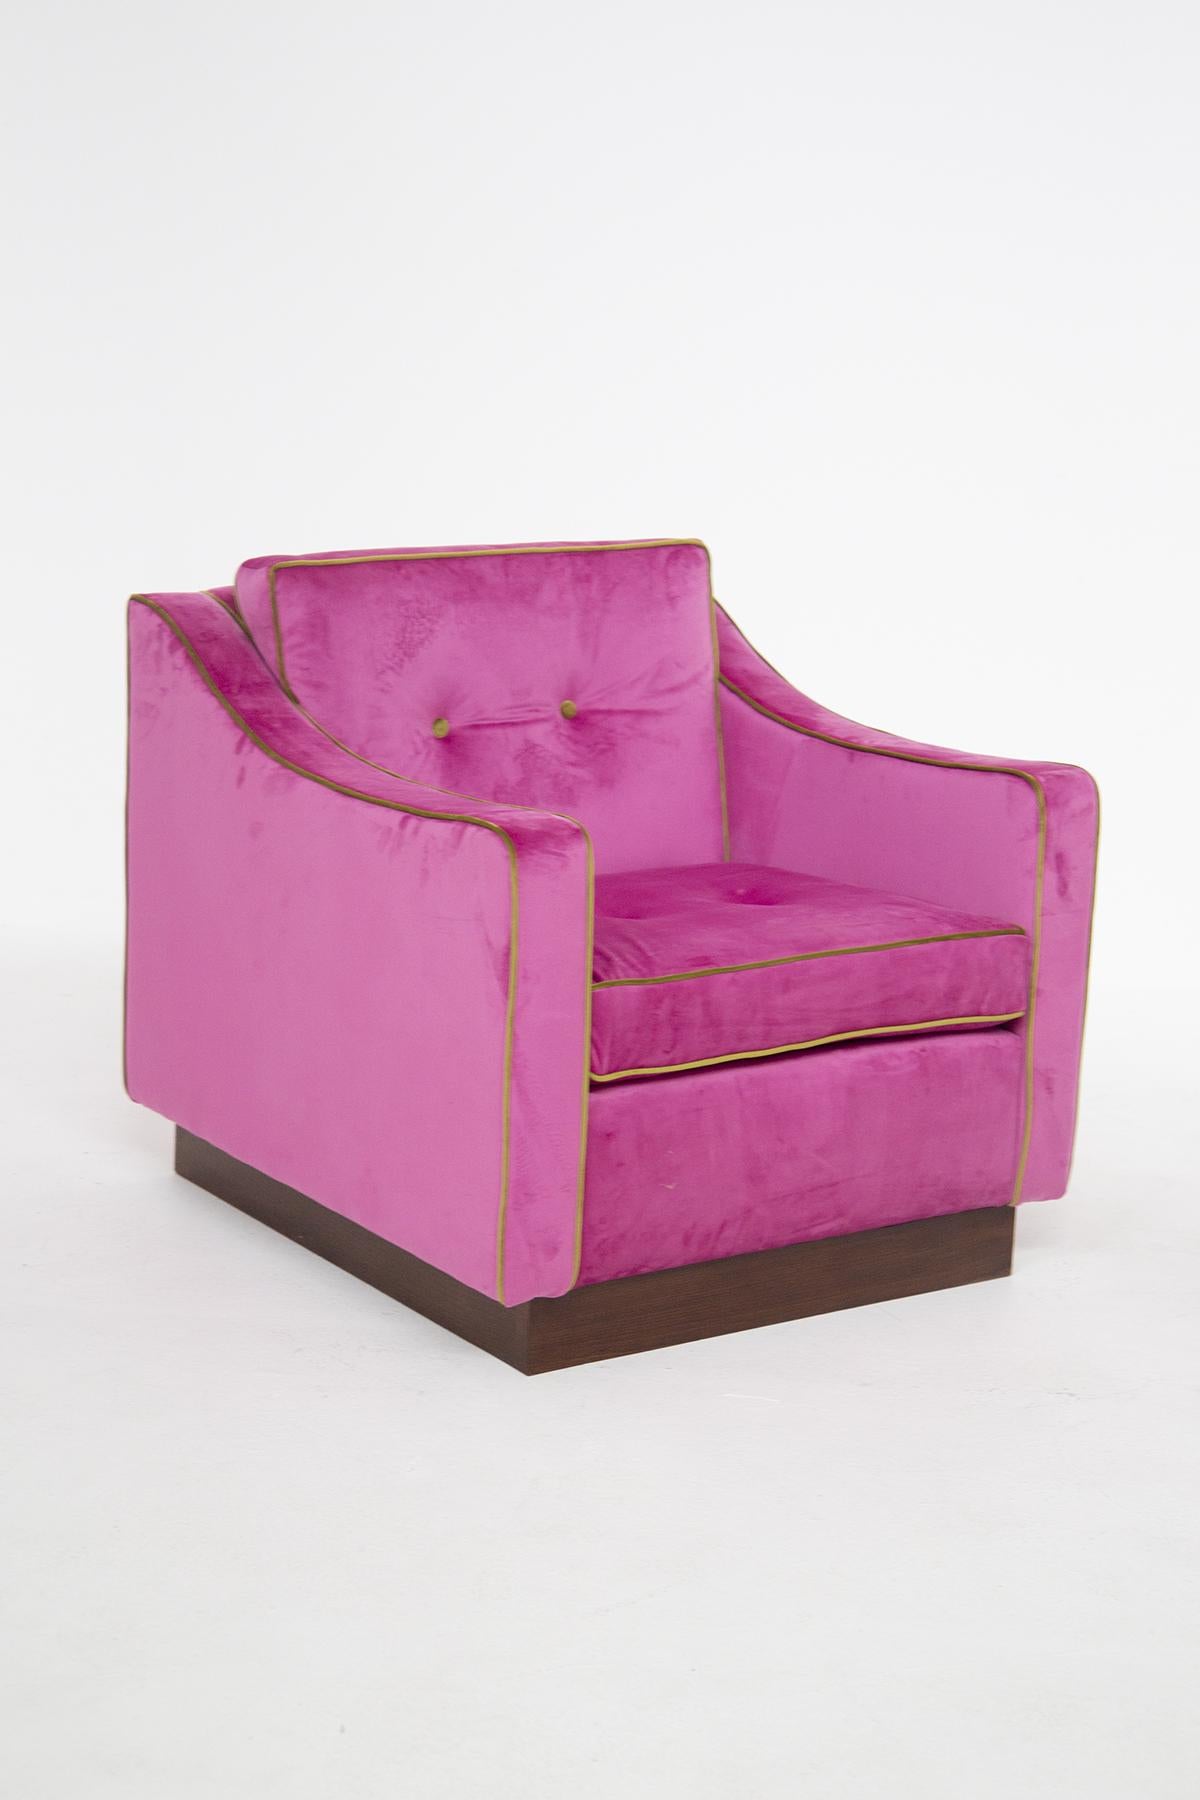 Luciano Frigerio Italian Armchairs in Pink and Green Velvet 1